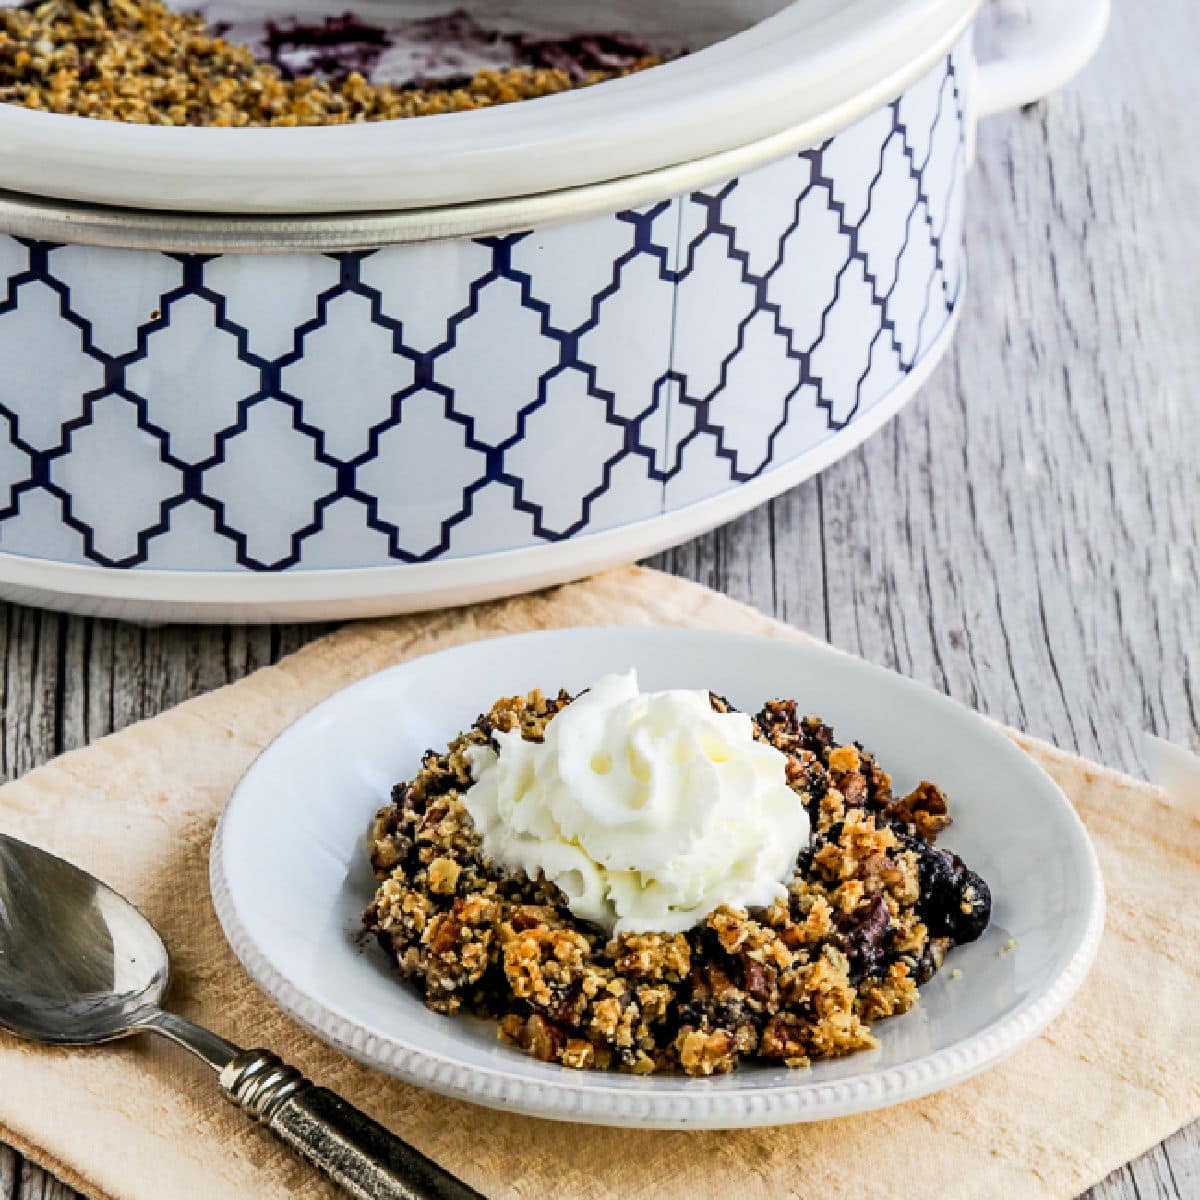 Square image for Slow Cooker Blueberry Crisp with one serving on plate and slow cooker in back.